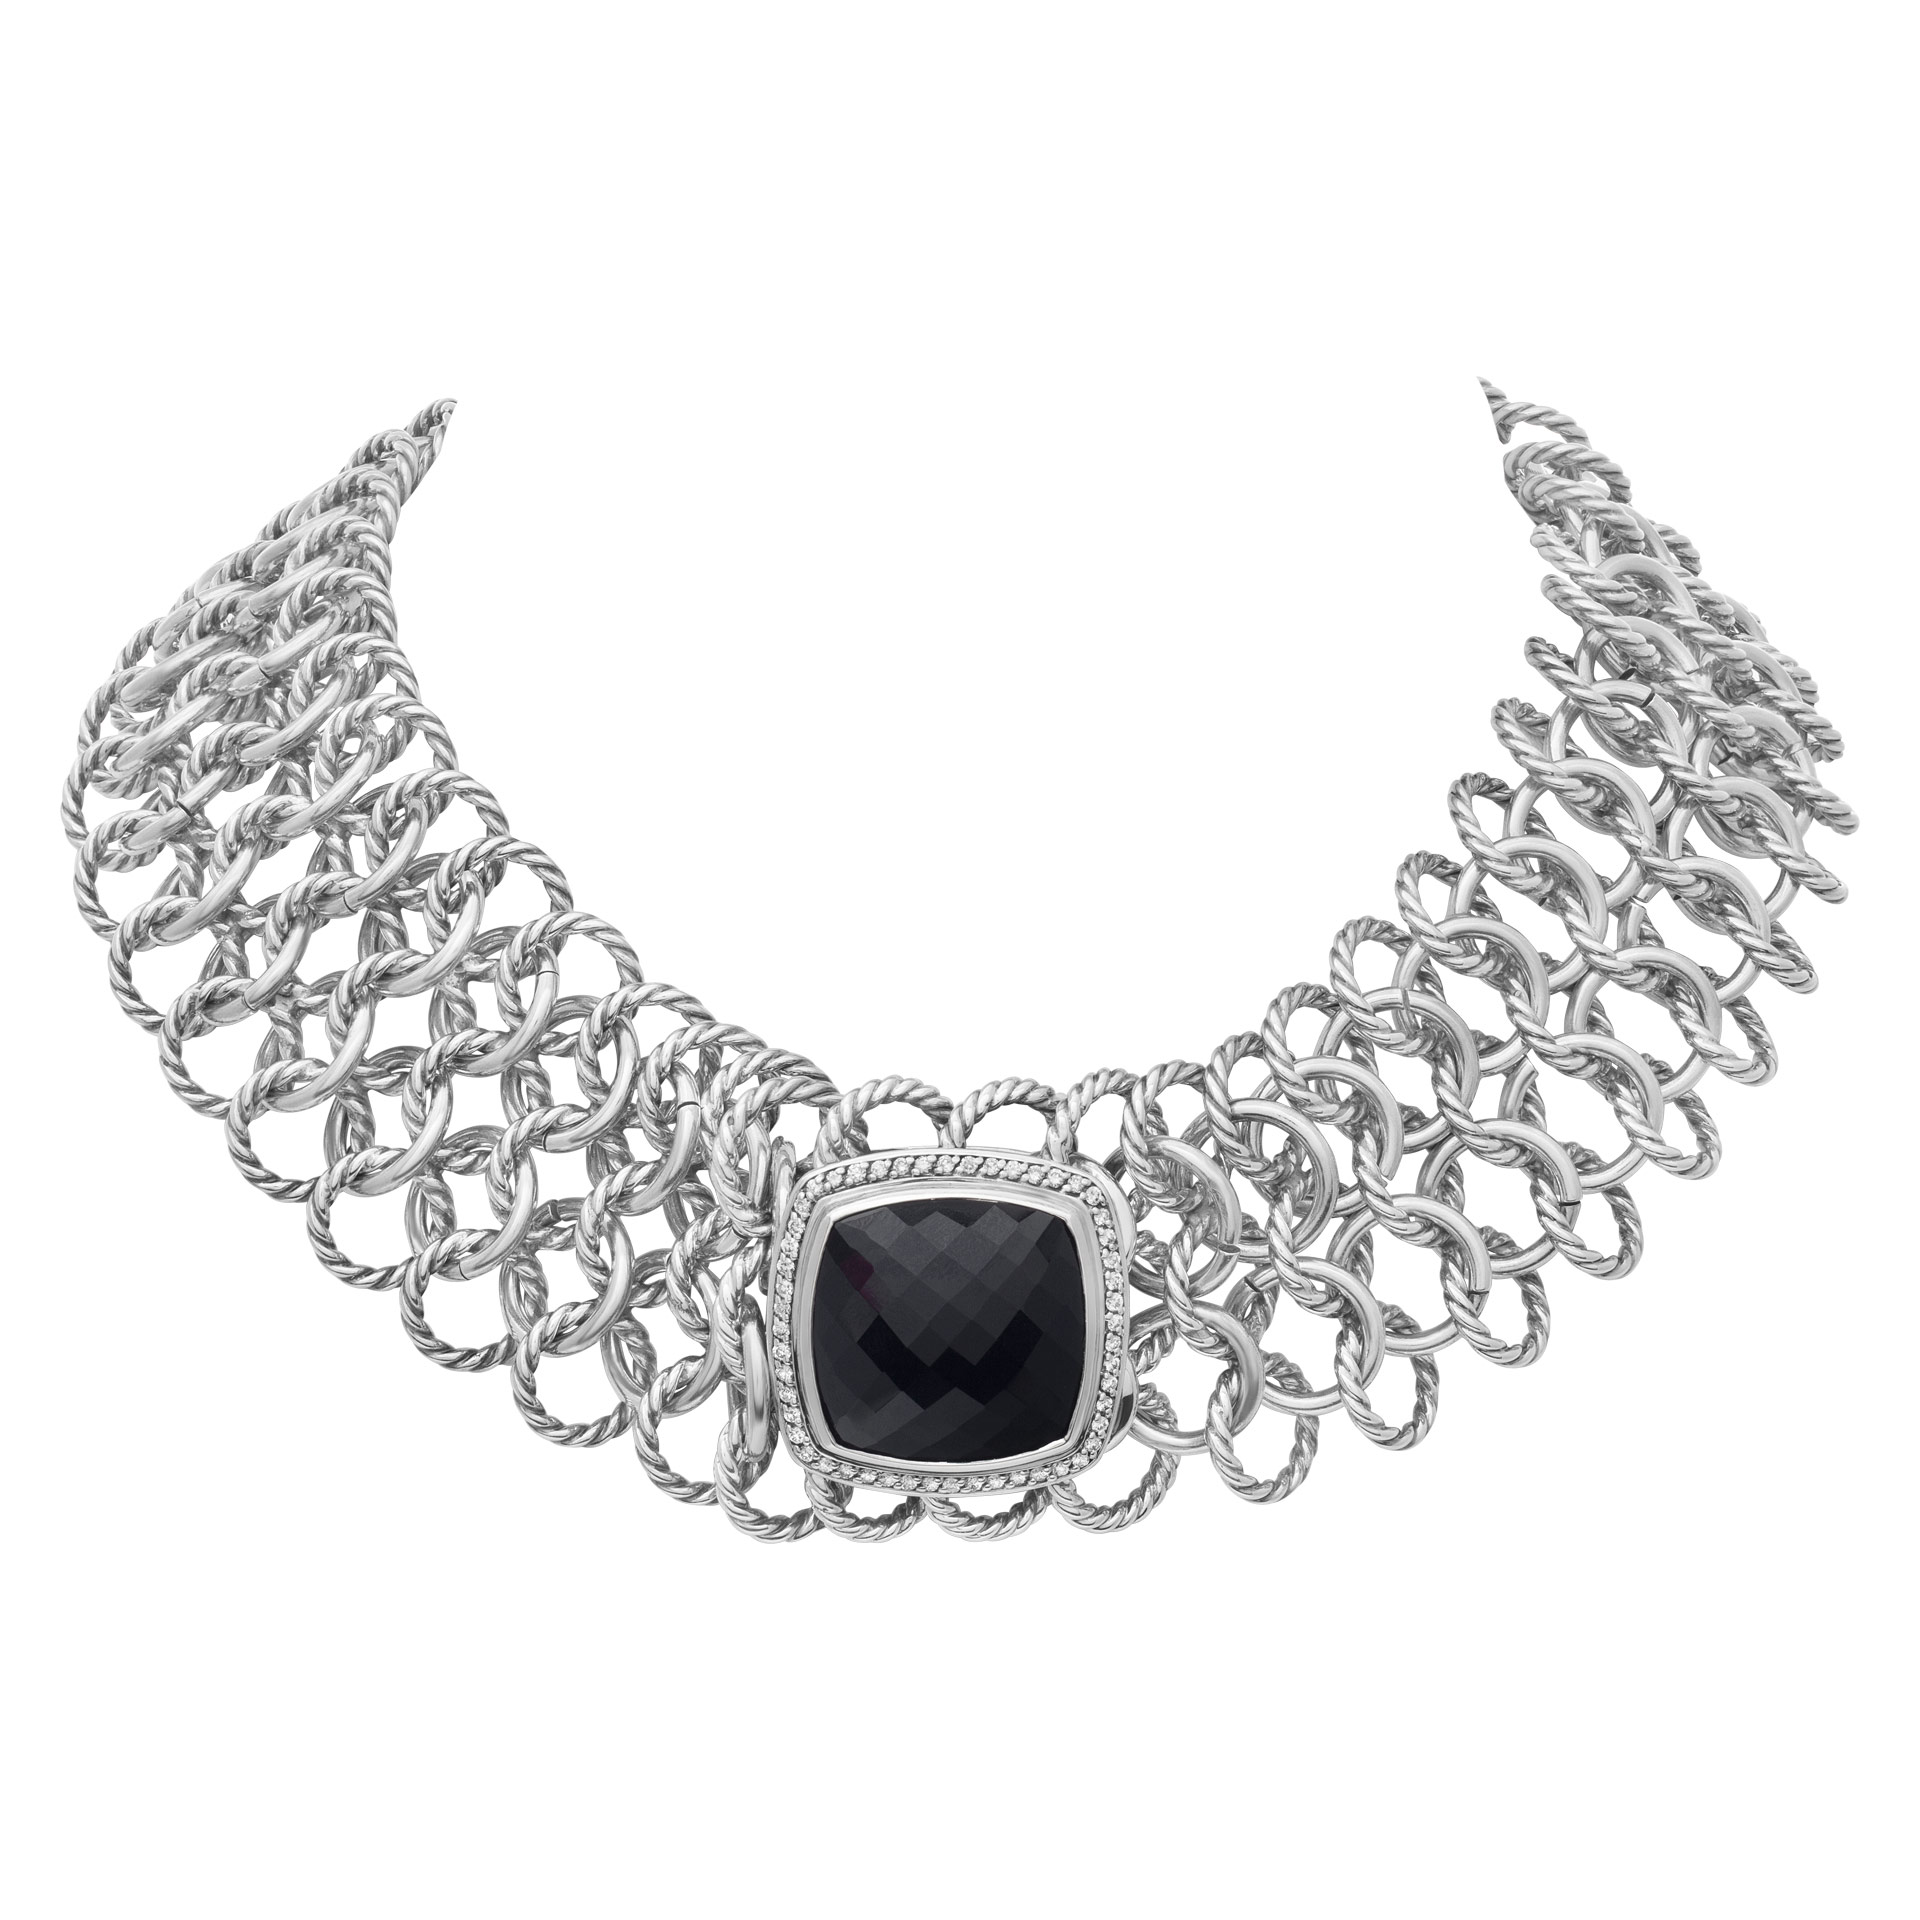 David Yurman Atlas Chainmail sterling silver choker necklace with faceted onyx surrounded by diamonds image 1